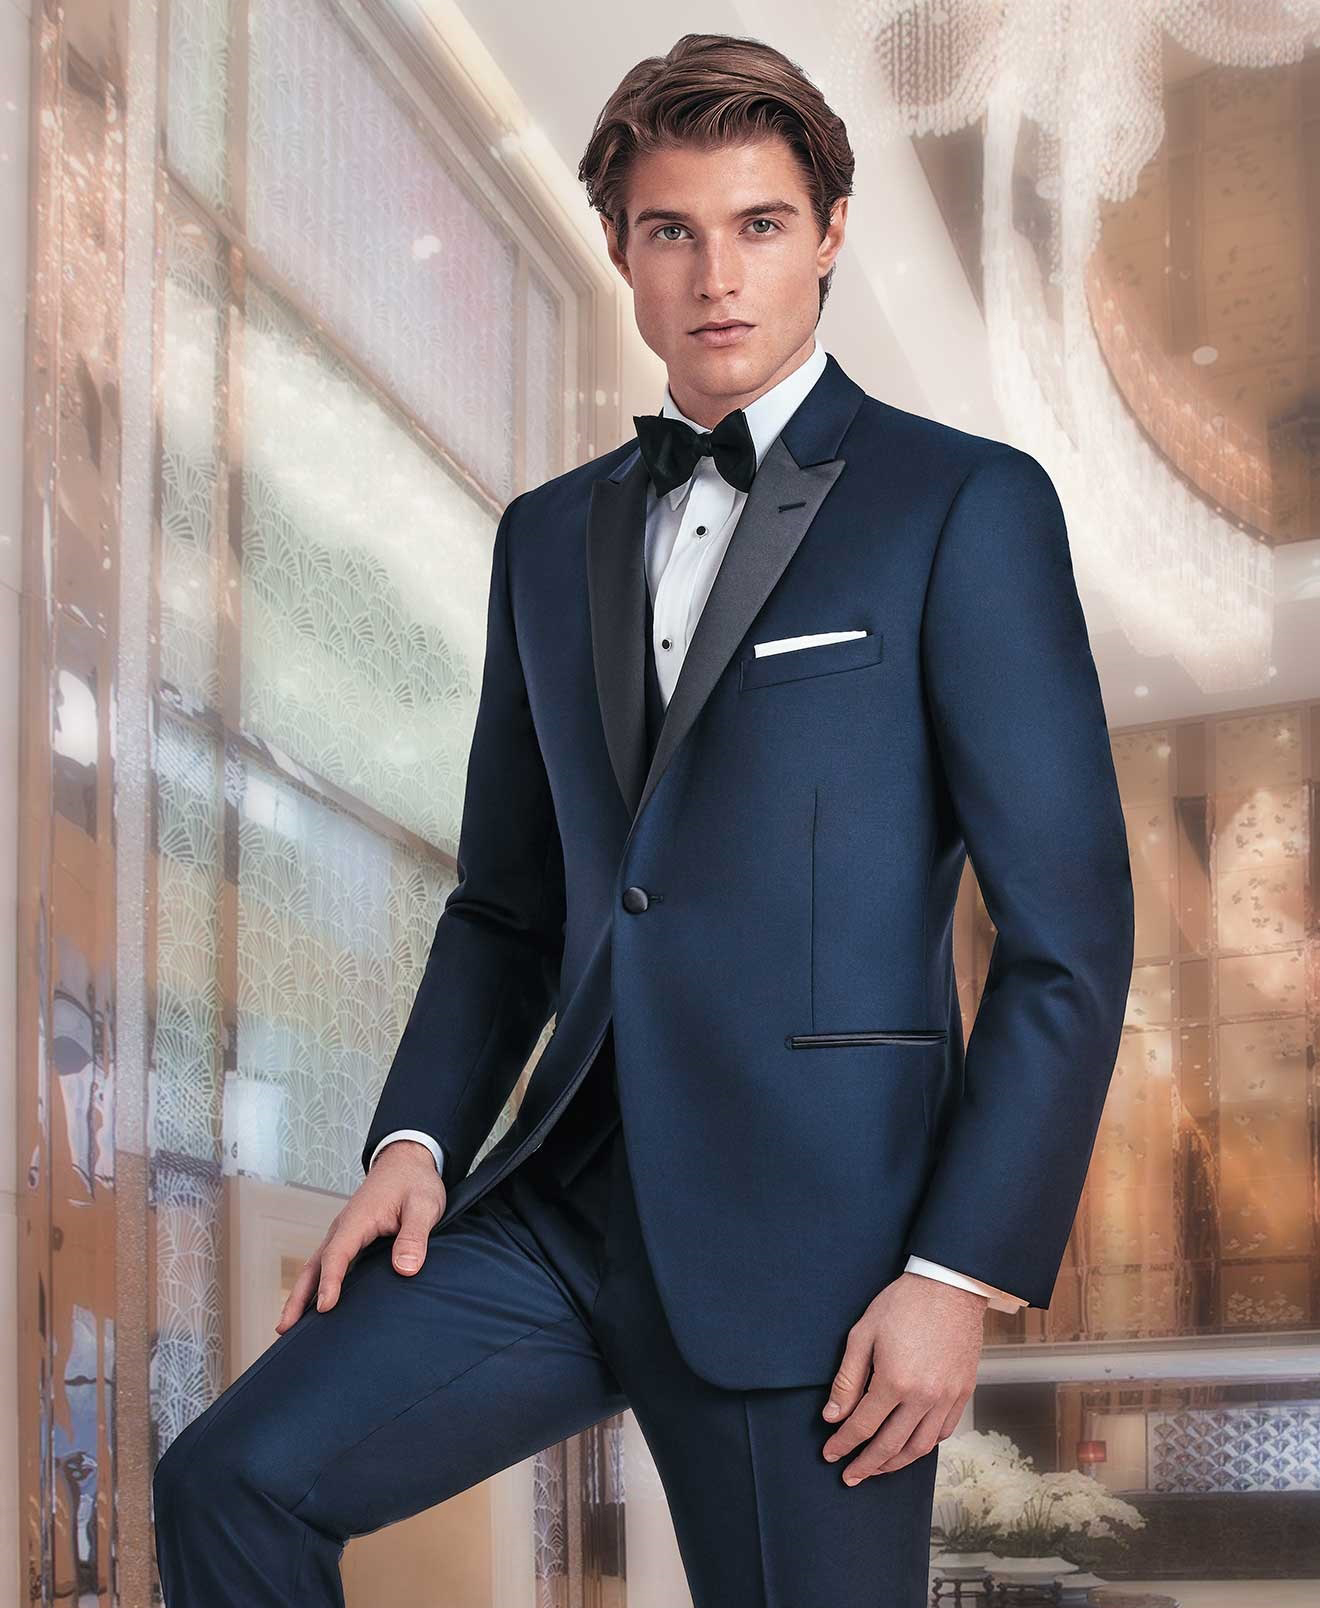 GUIDE TO SPRING WEDDING SUITS FOR MEN